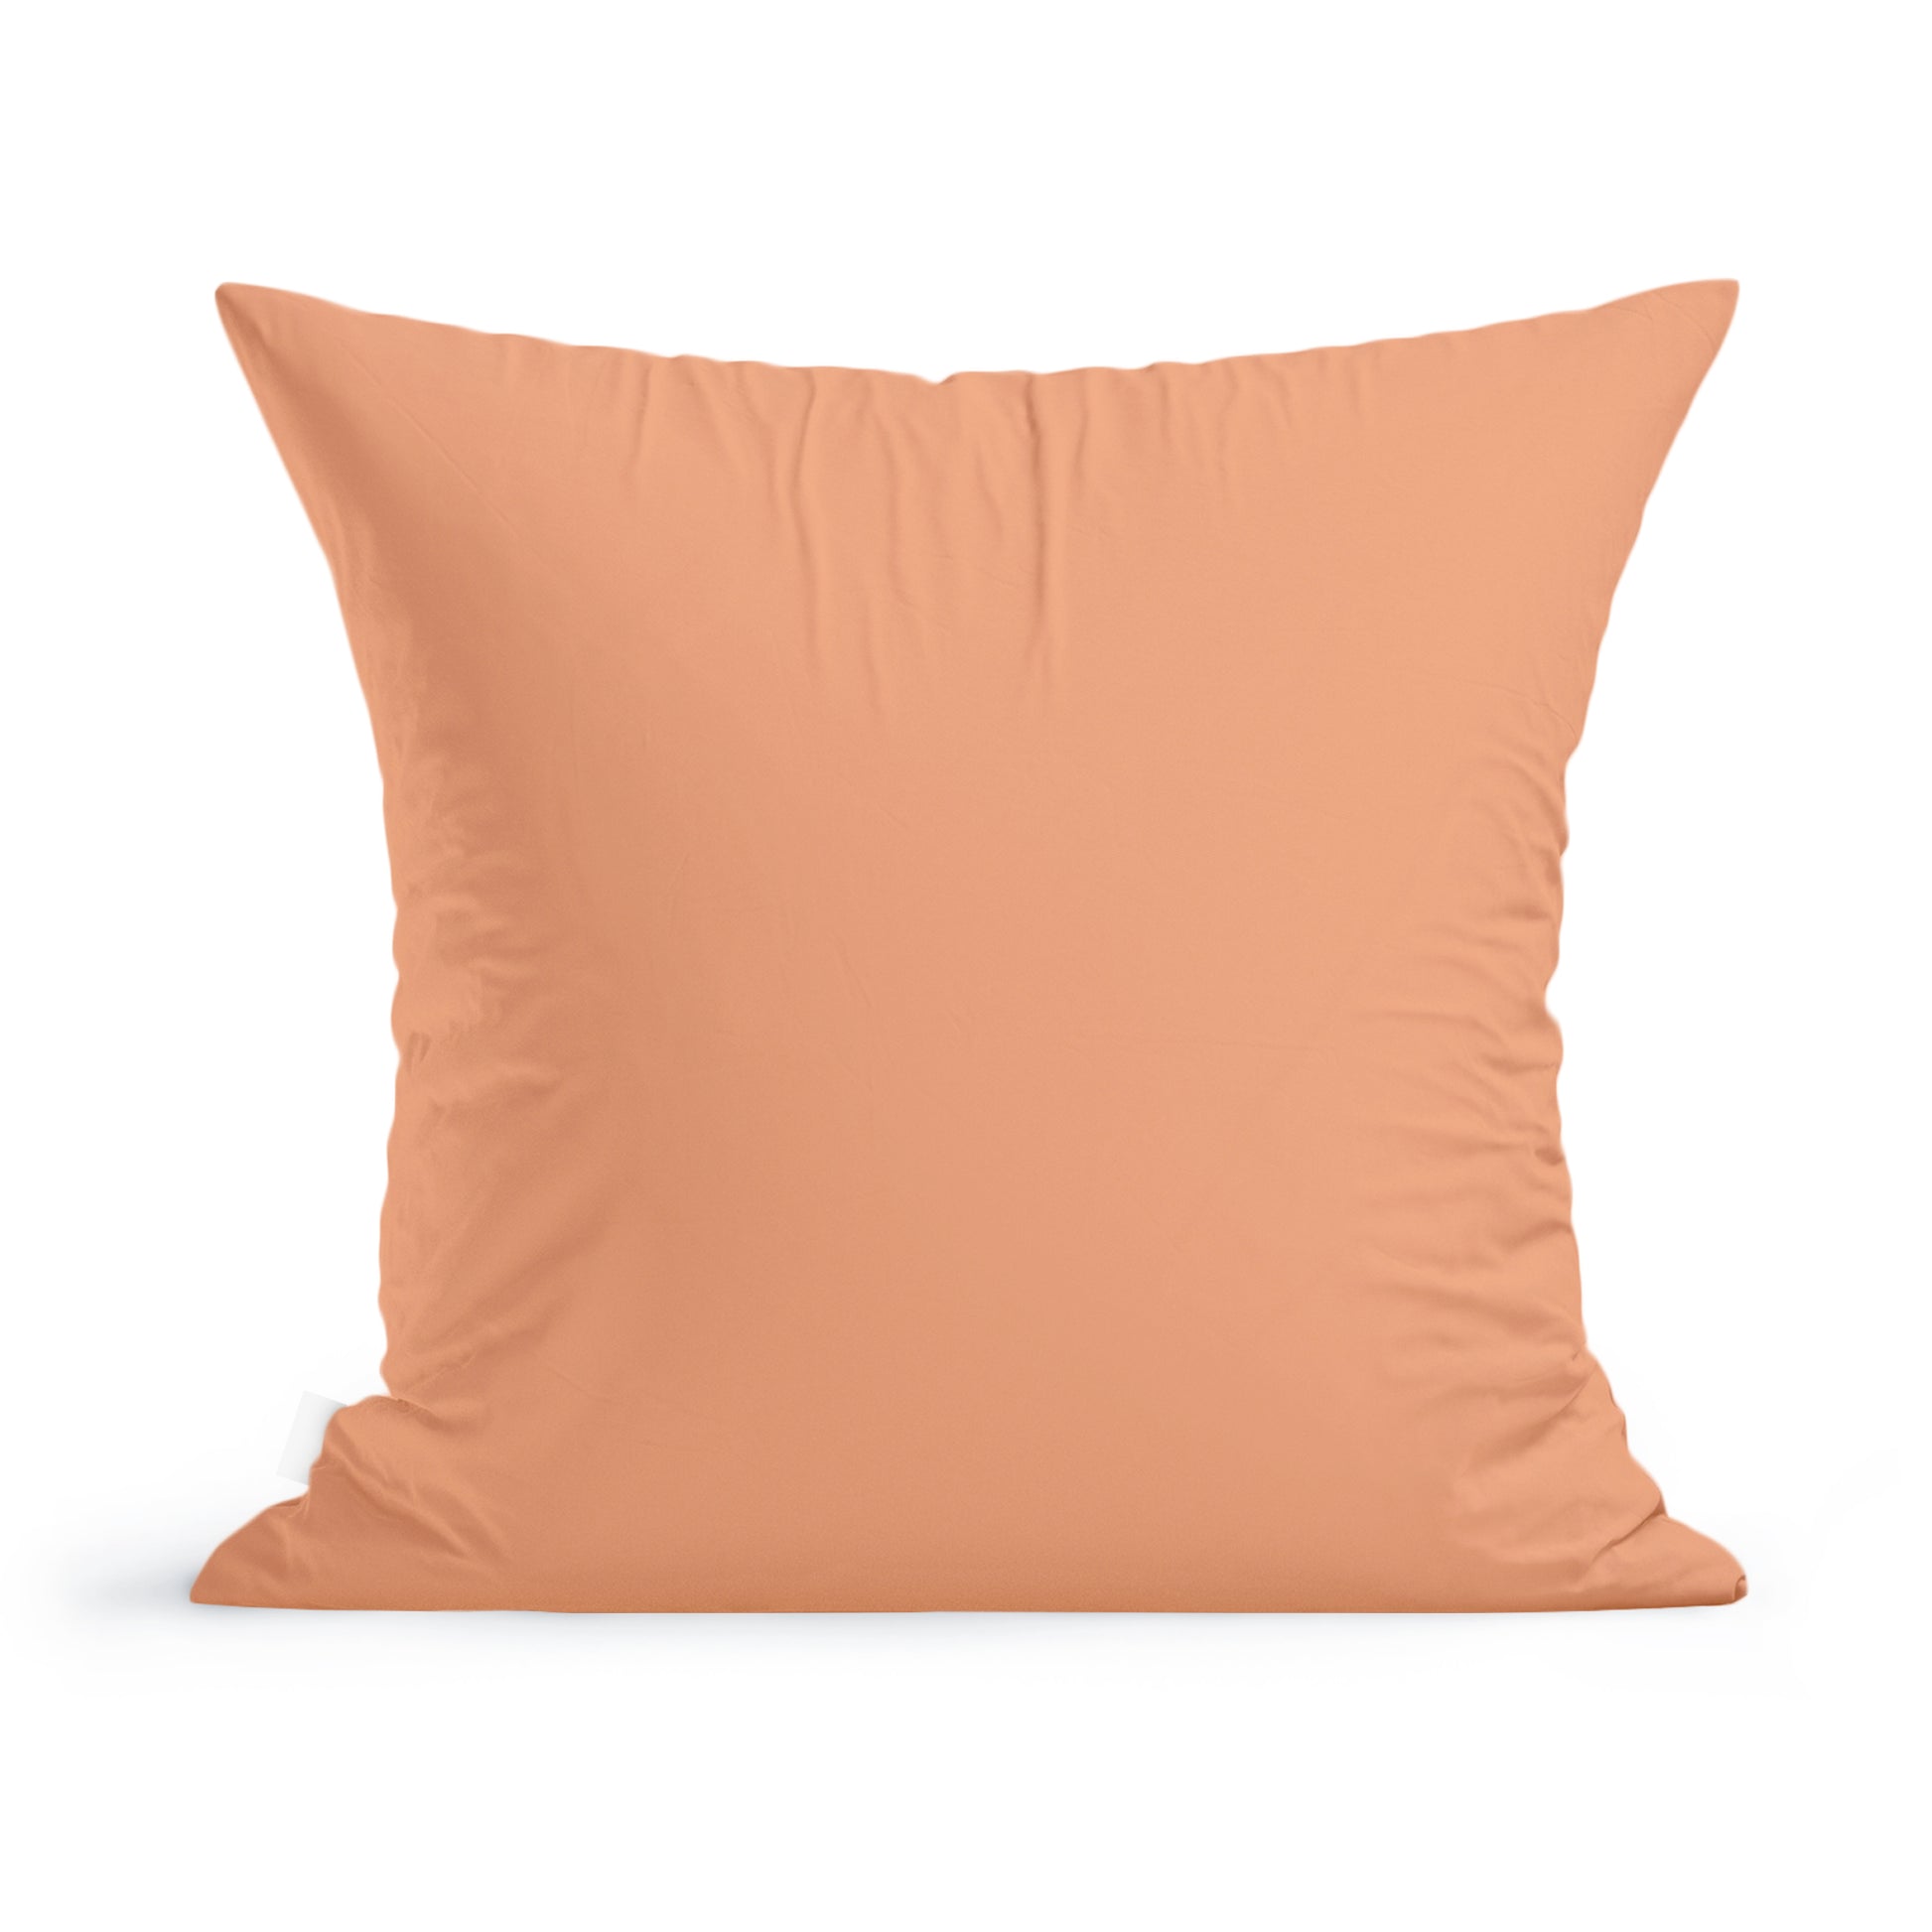 A plain peach-colored Fresh Florals pillow by Rustic County with a smooth texture and a slight crease, isolated on a white background.